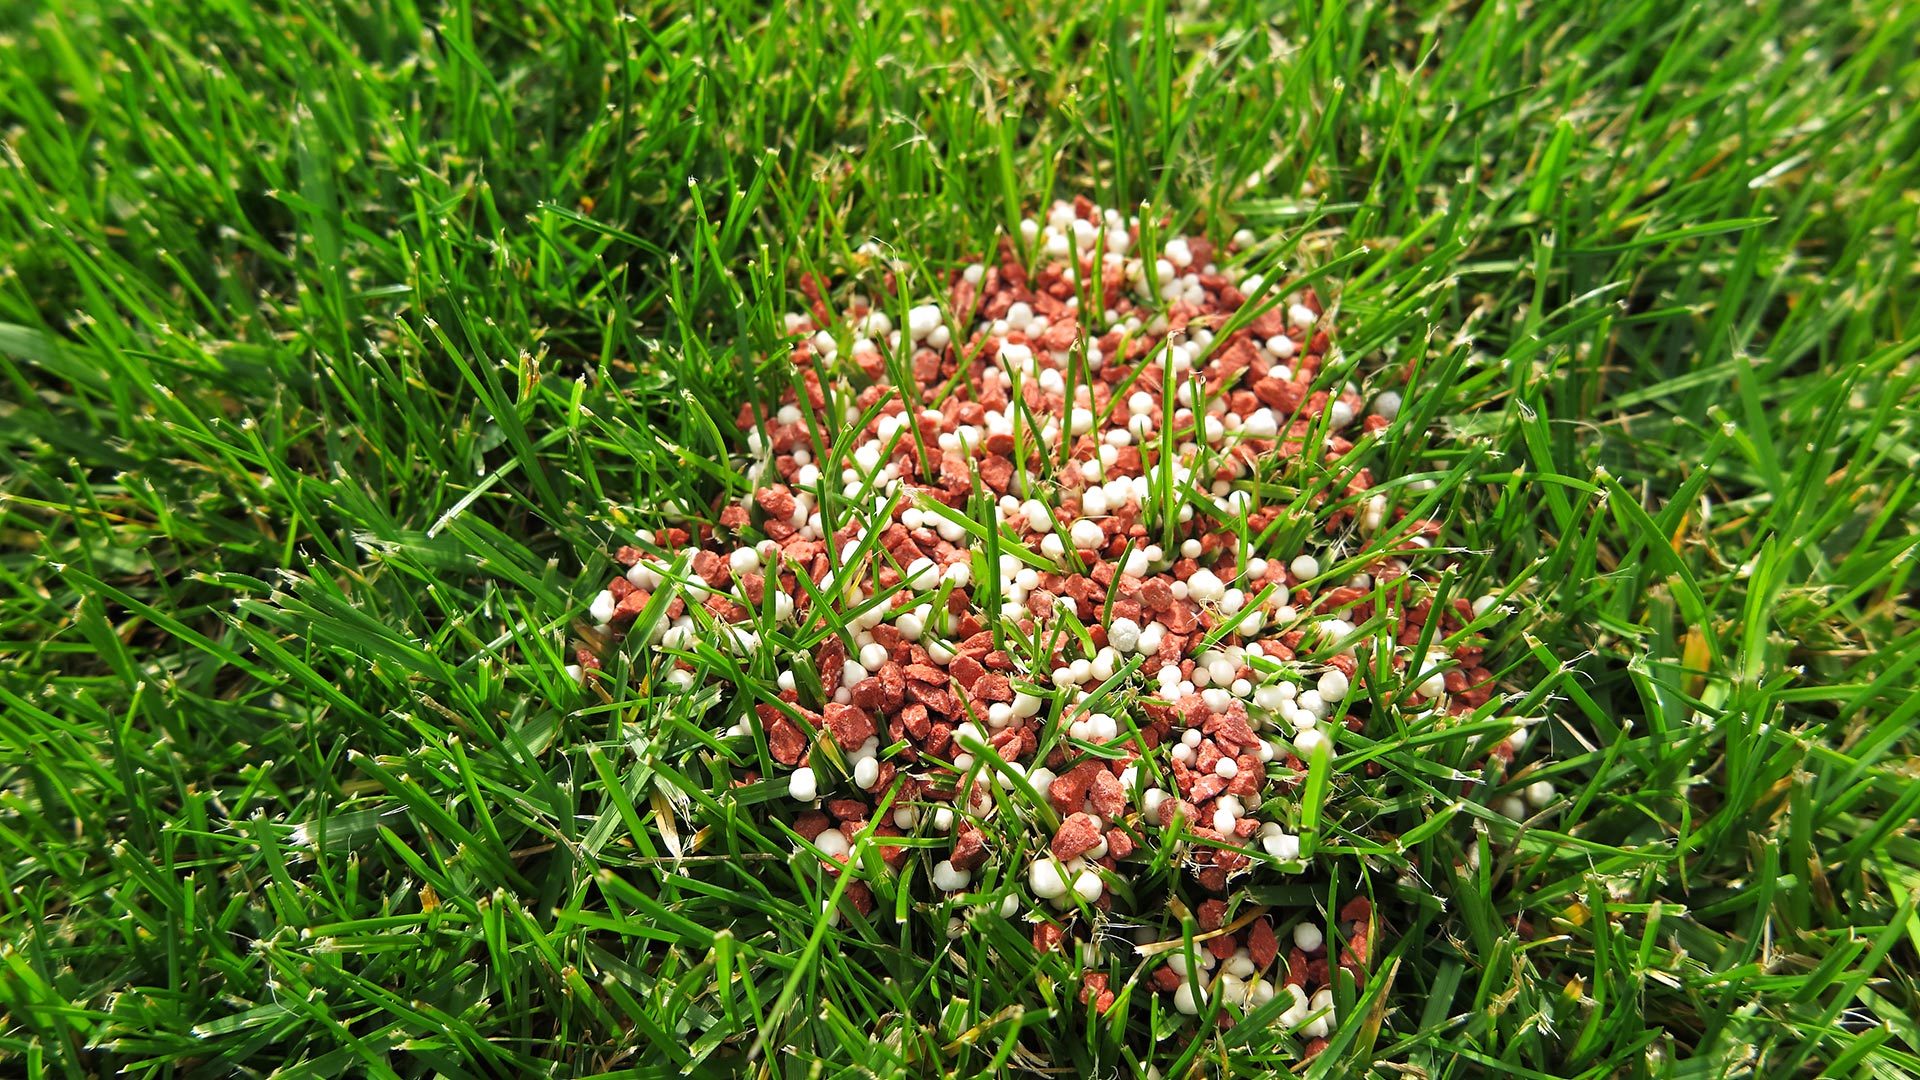 What Is Actually in the Fertilizer That You’re Applying to Your Lawn?